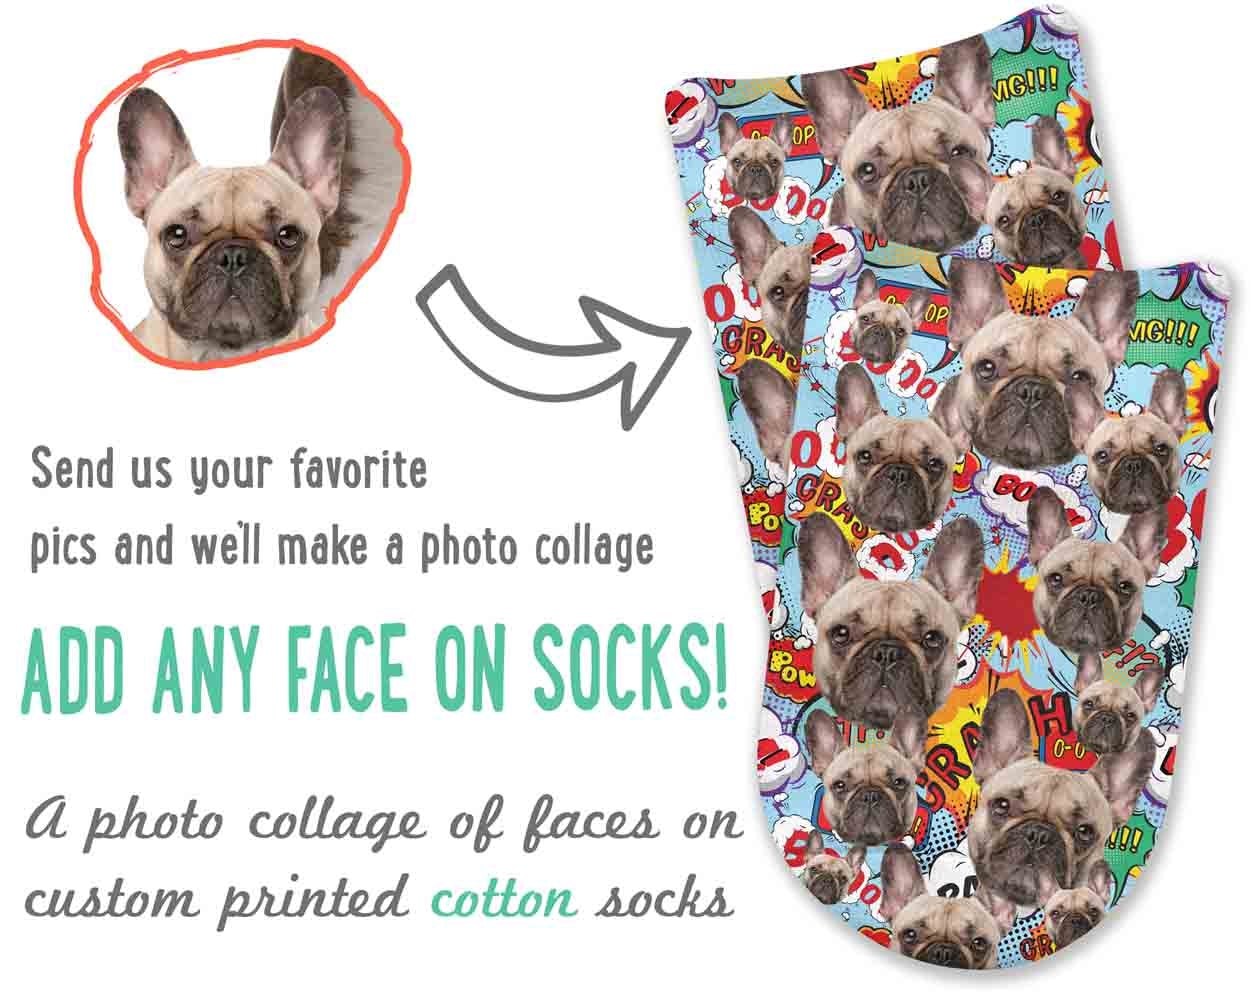 Photo collage face socks custom printed and personalized using your photo digitally printed on cotton no show socks on background of your choice make a great gift idea.